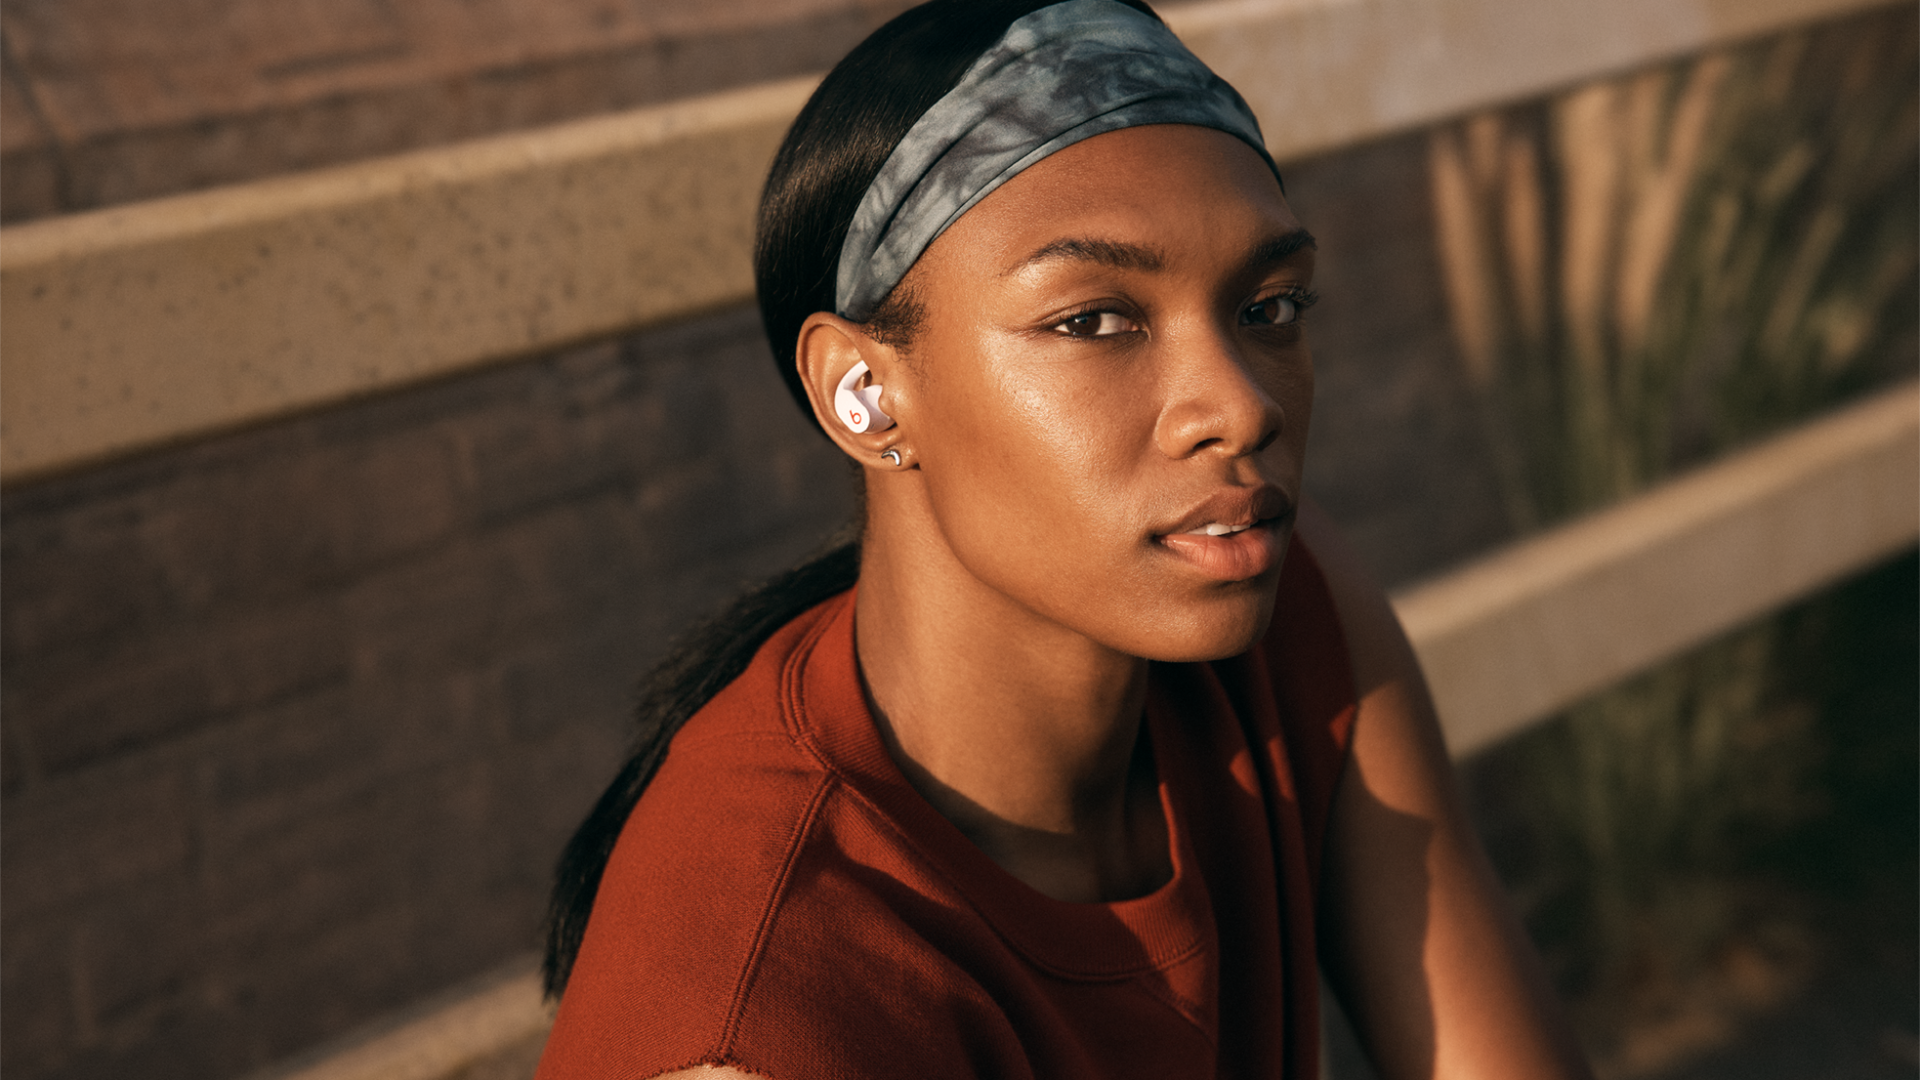 Beats Just Released Their Best Fitness Earphones Yet, But You Don't Have To Work Out To Appreciate Them